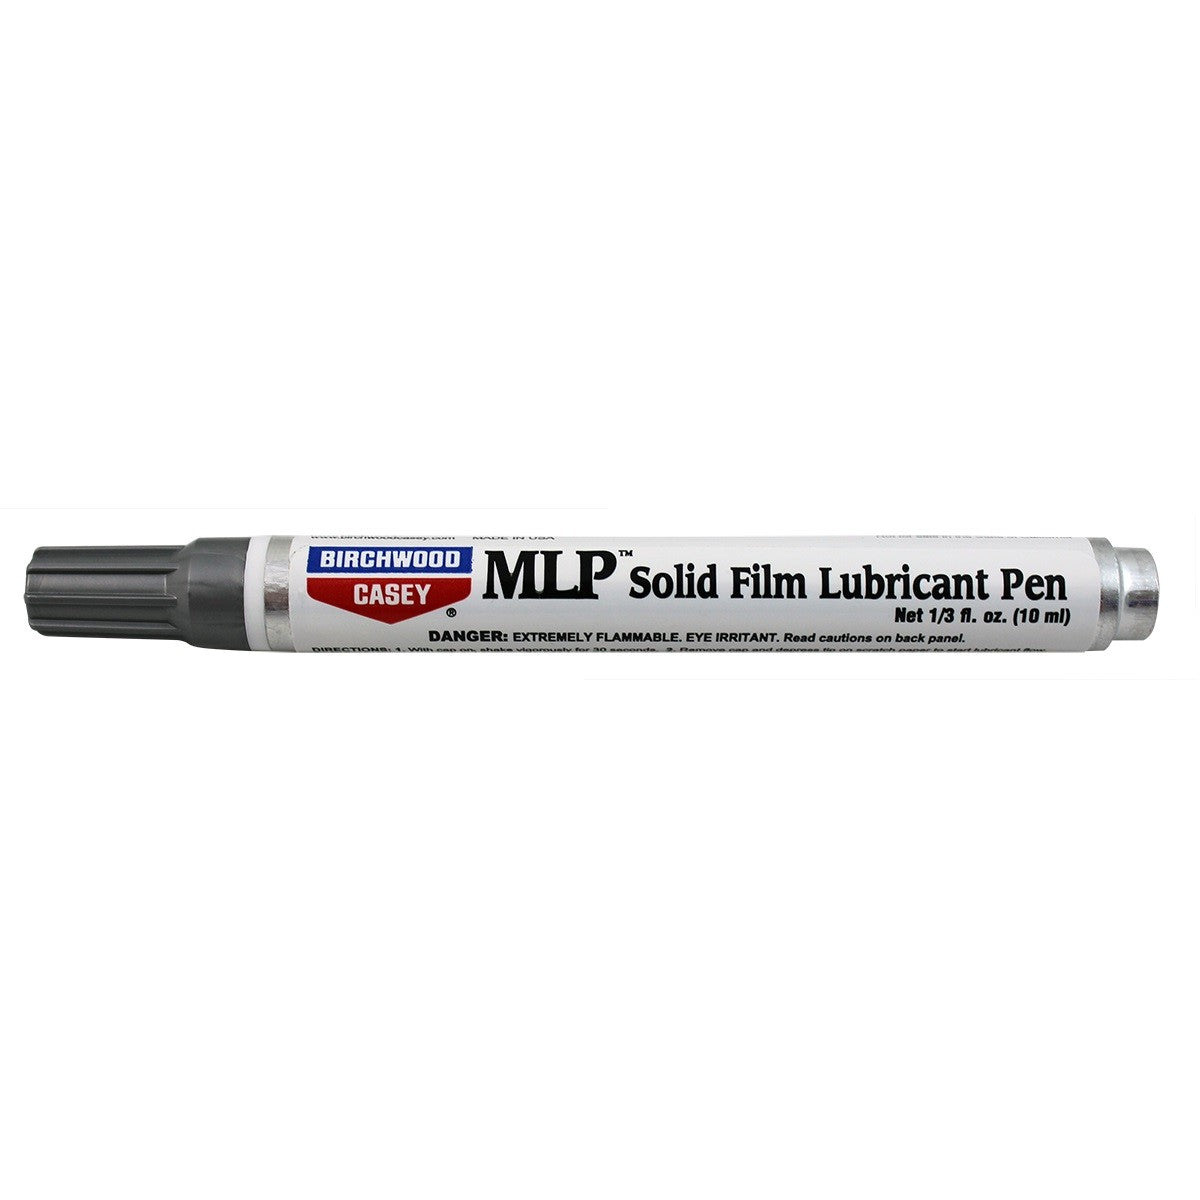 Birchwood Casey Mlp Solid Film Lubricant Pen 0.33oz -  - Mansfield Hunting & Fishing - Products to prepare for Corona Virus